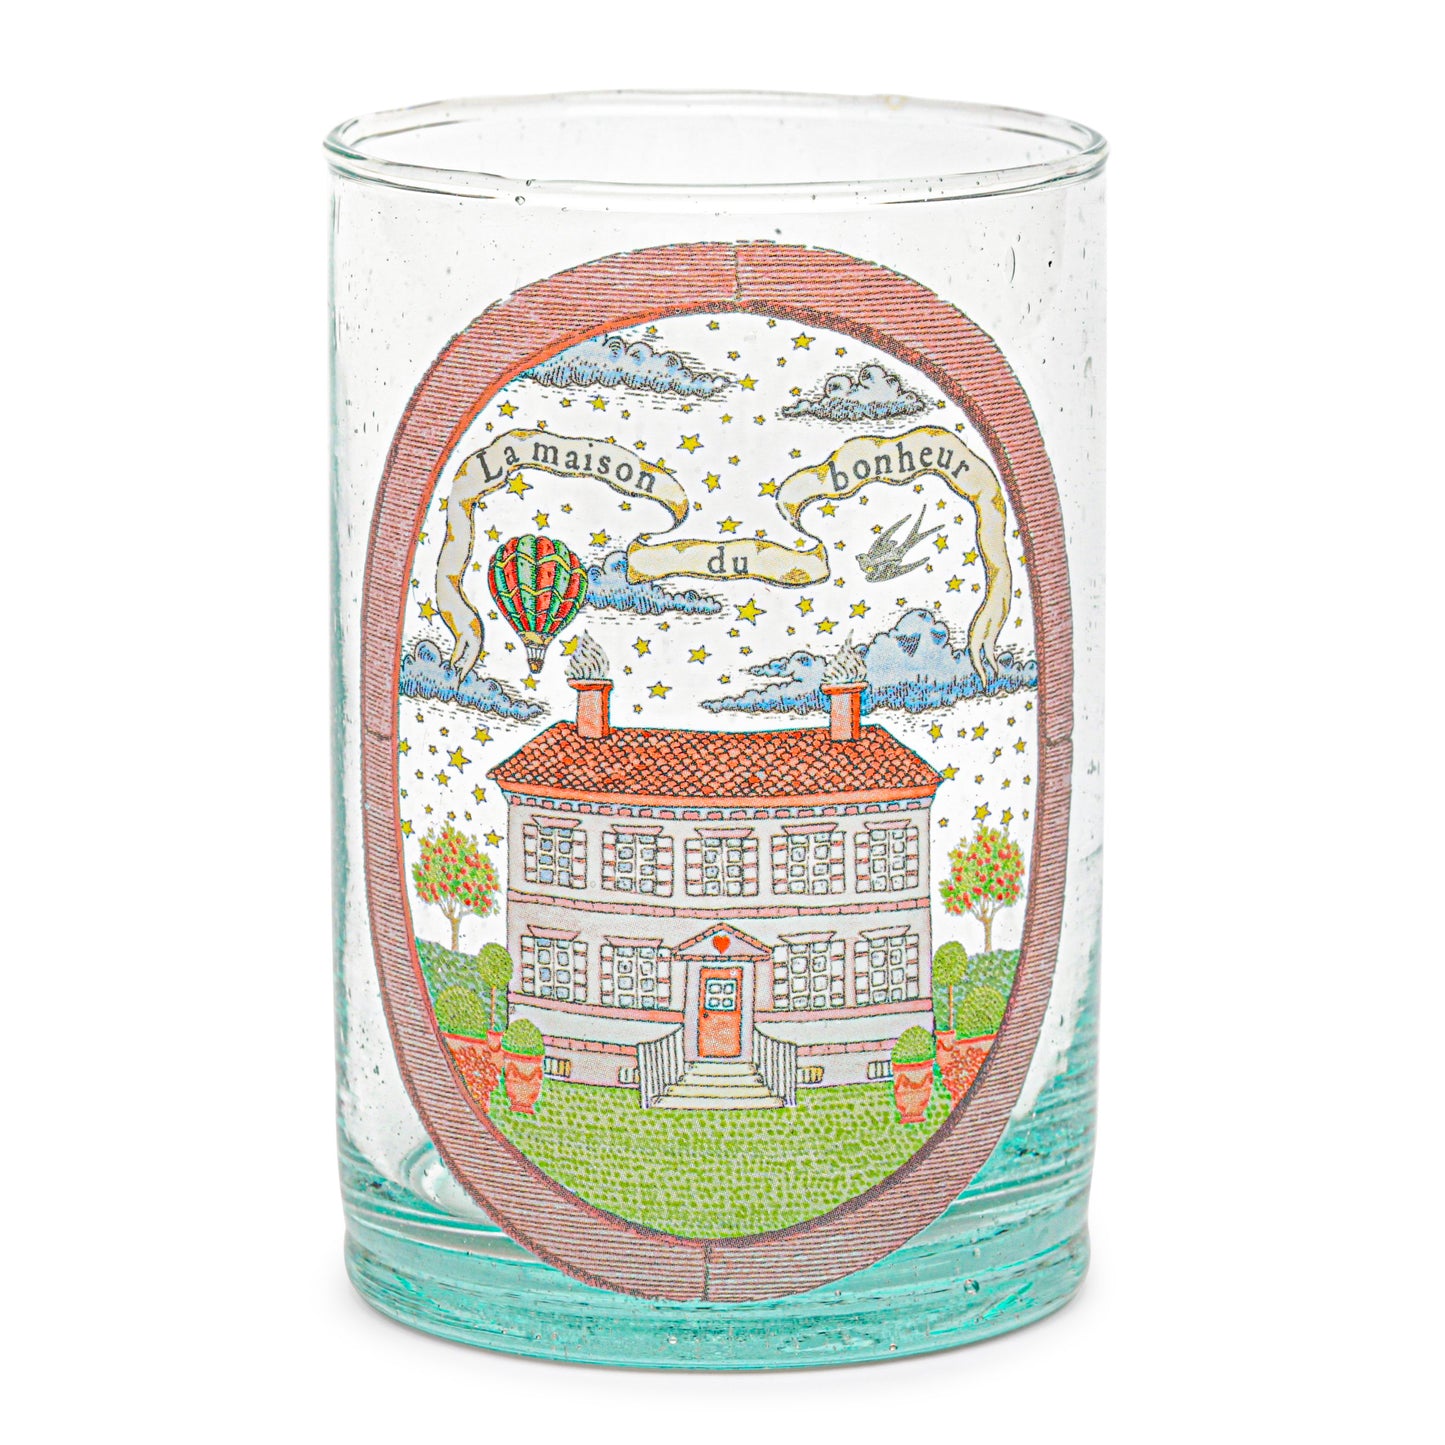 Illustrated glass | THE HOUSE OF HAPPINESS